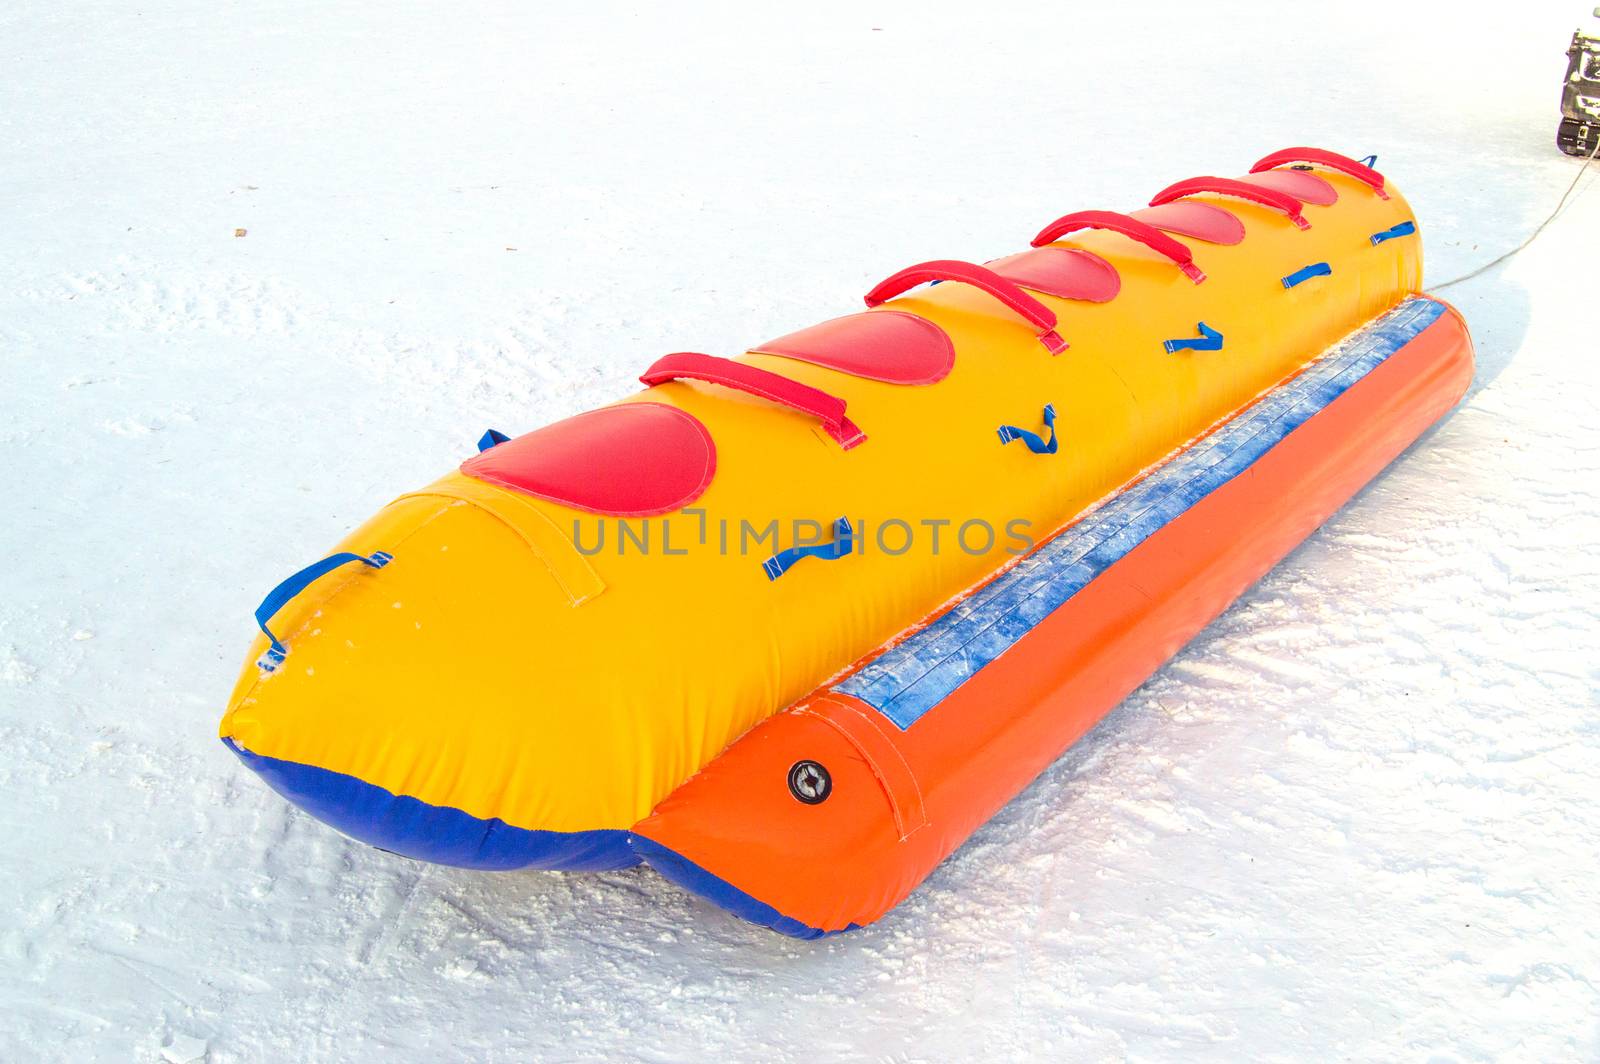 Inflatable rubber multi-seat sleigh for high-speed snow skiing in winter, winter activity concept and Christmas fun.